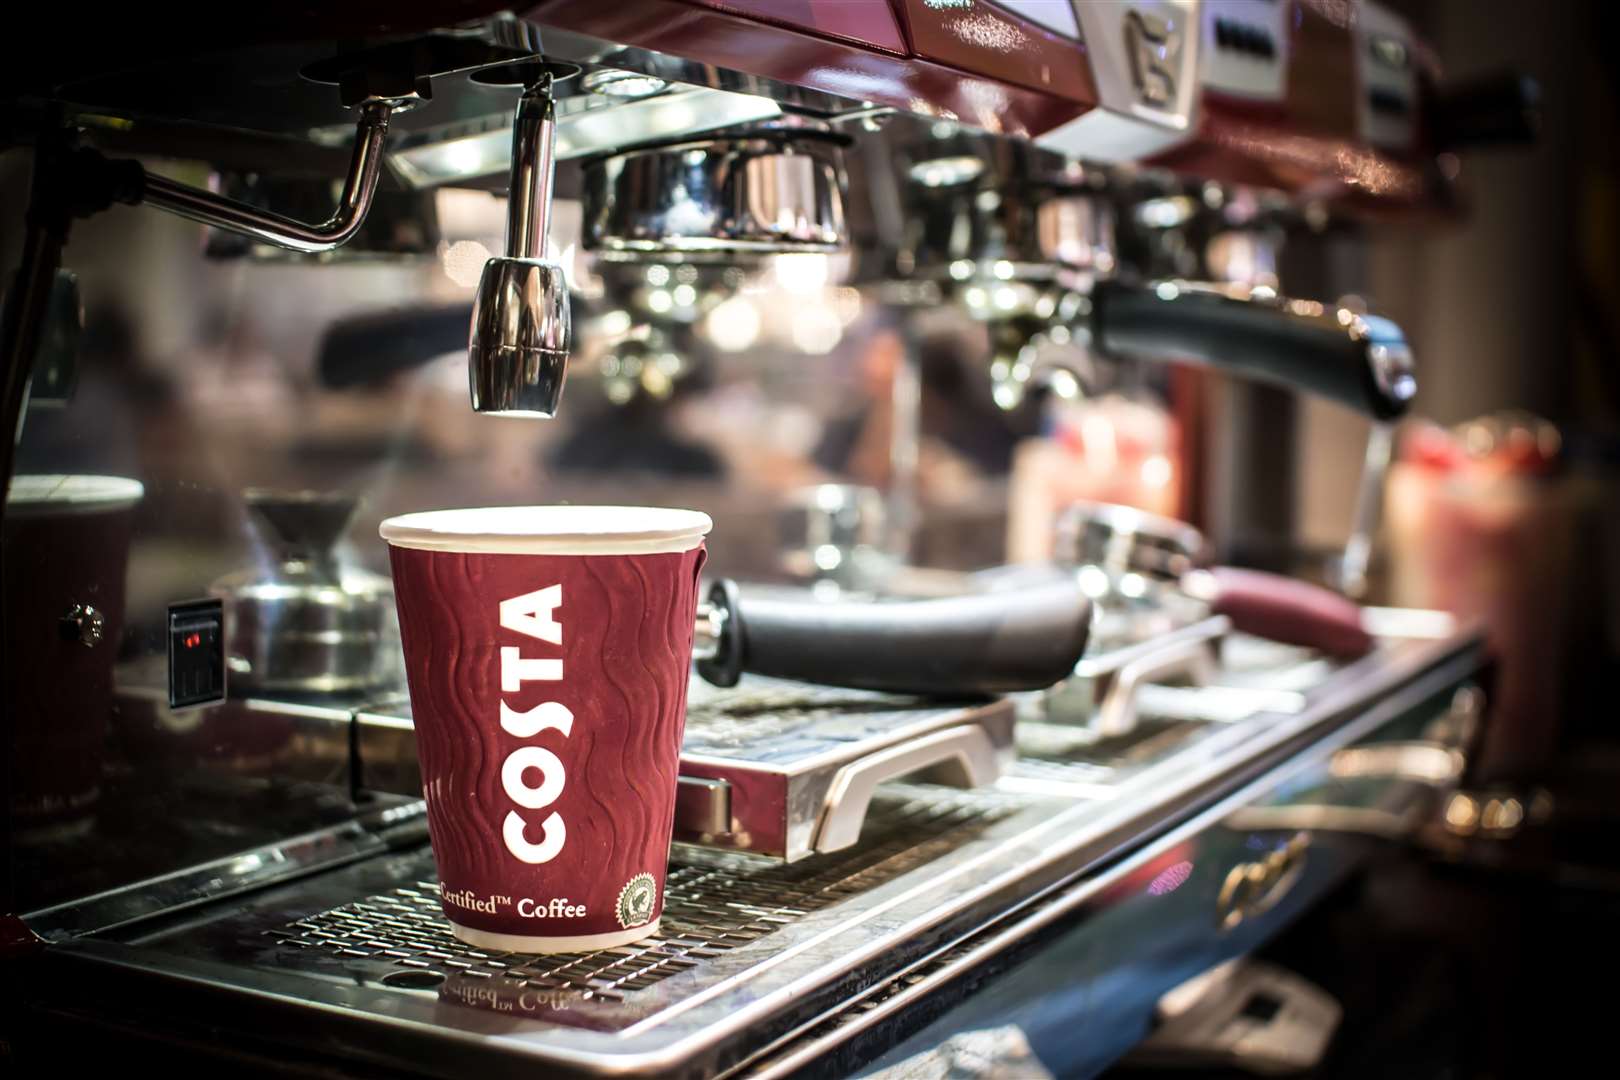 Coffee shops like Costa were once opposed - now they're welcomed to drive up town centre footfall